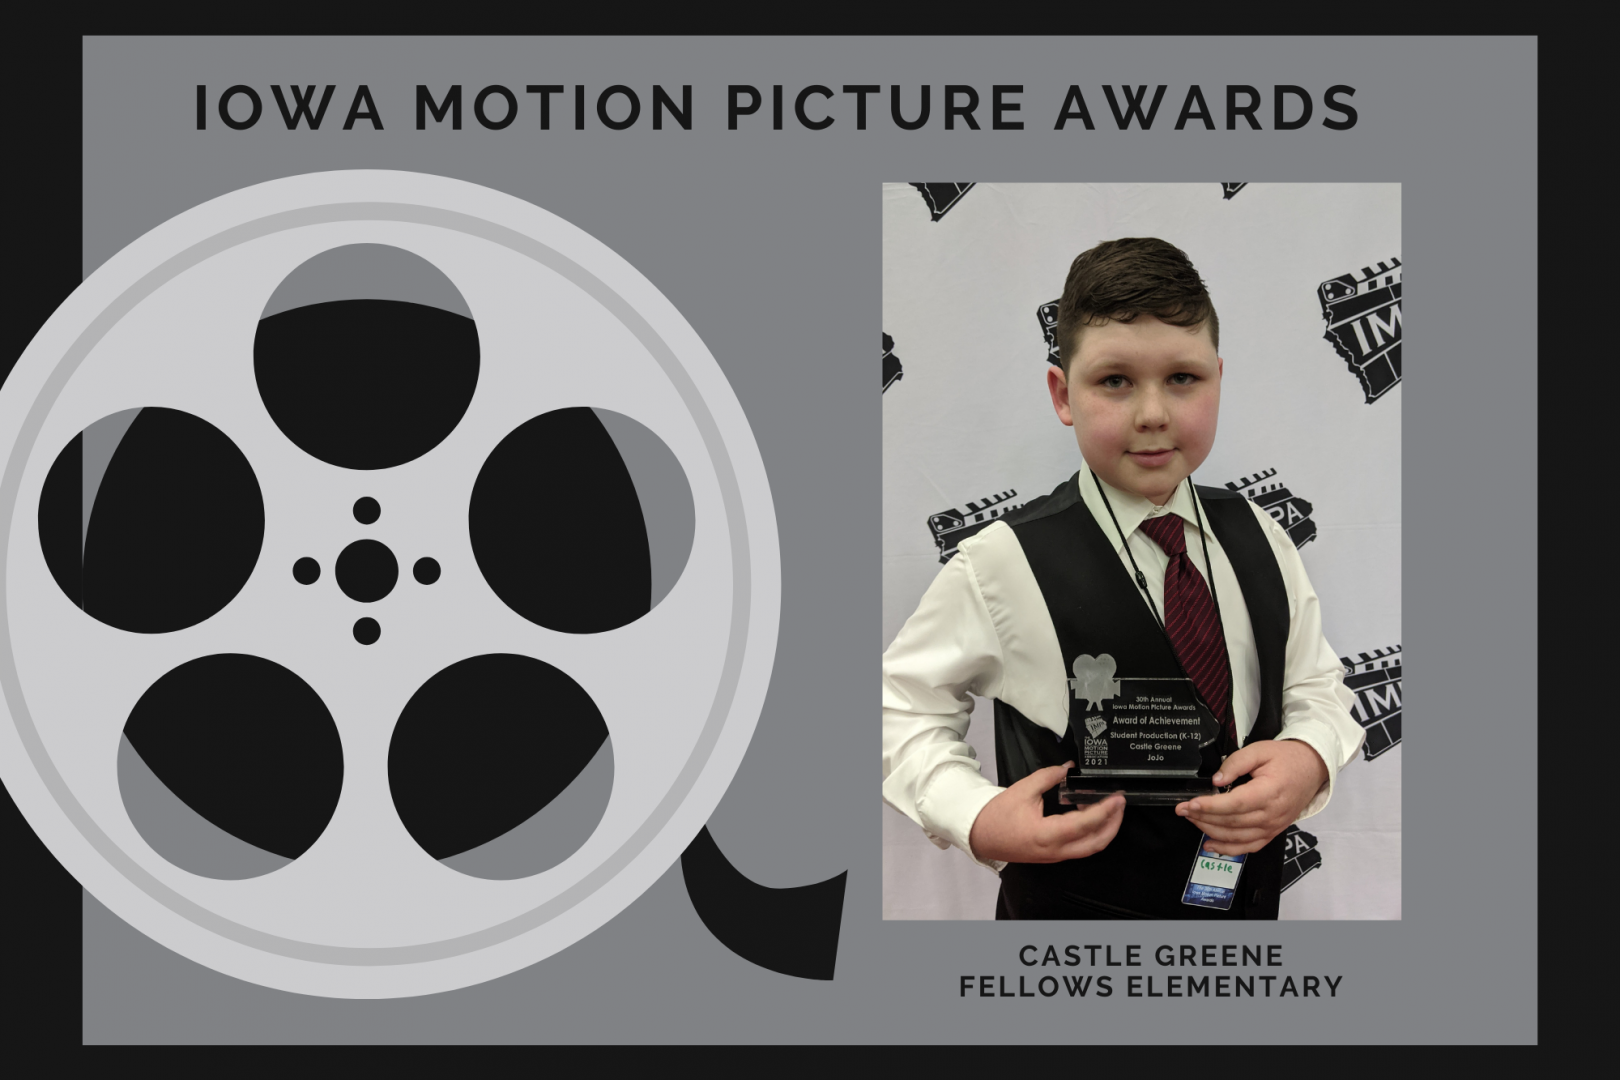 Iowa Motion Picture Awards